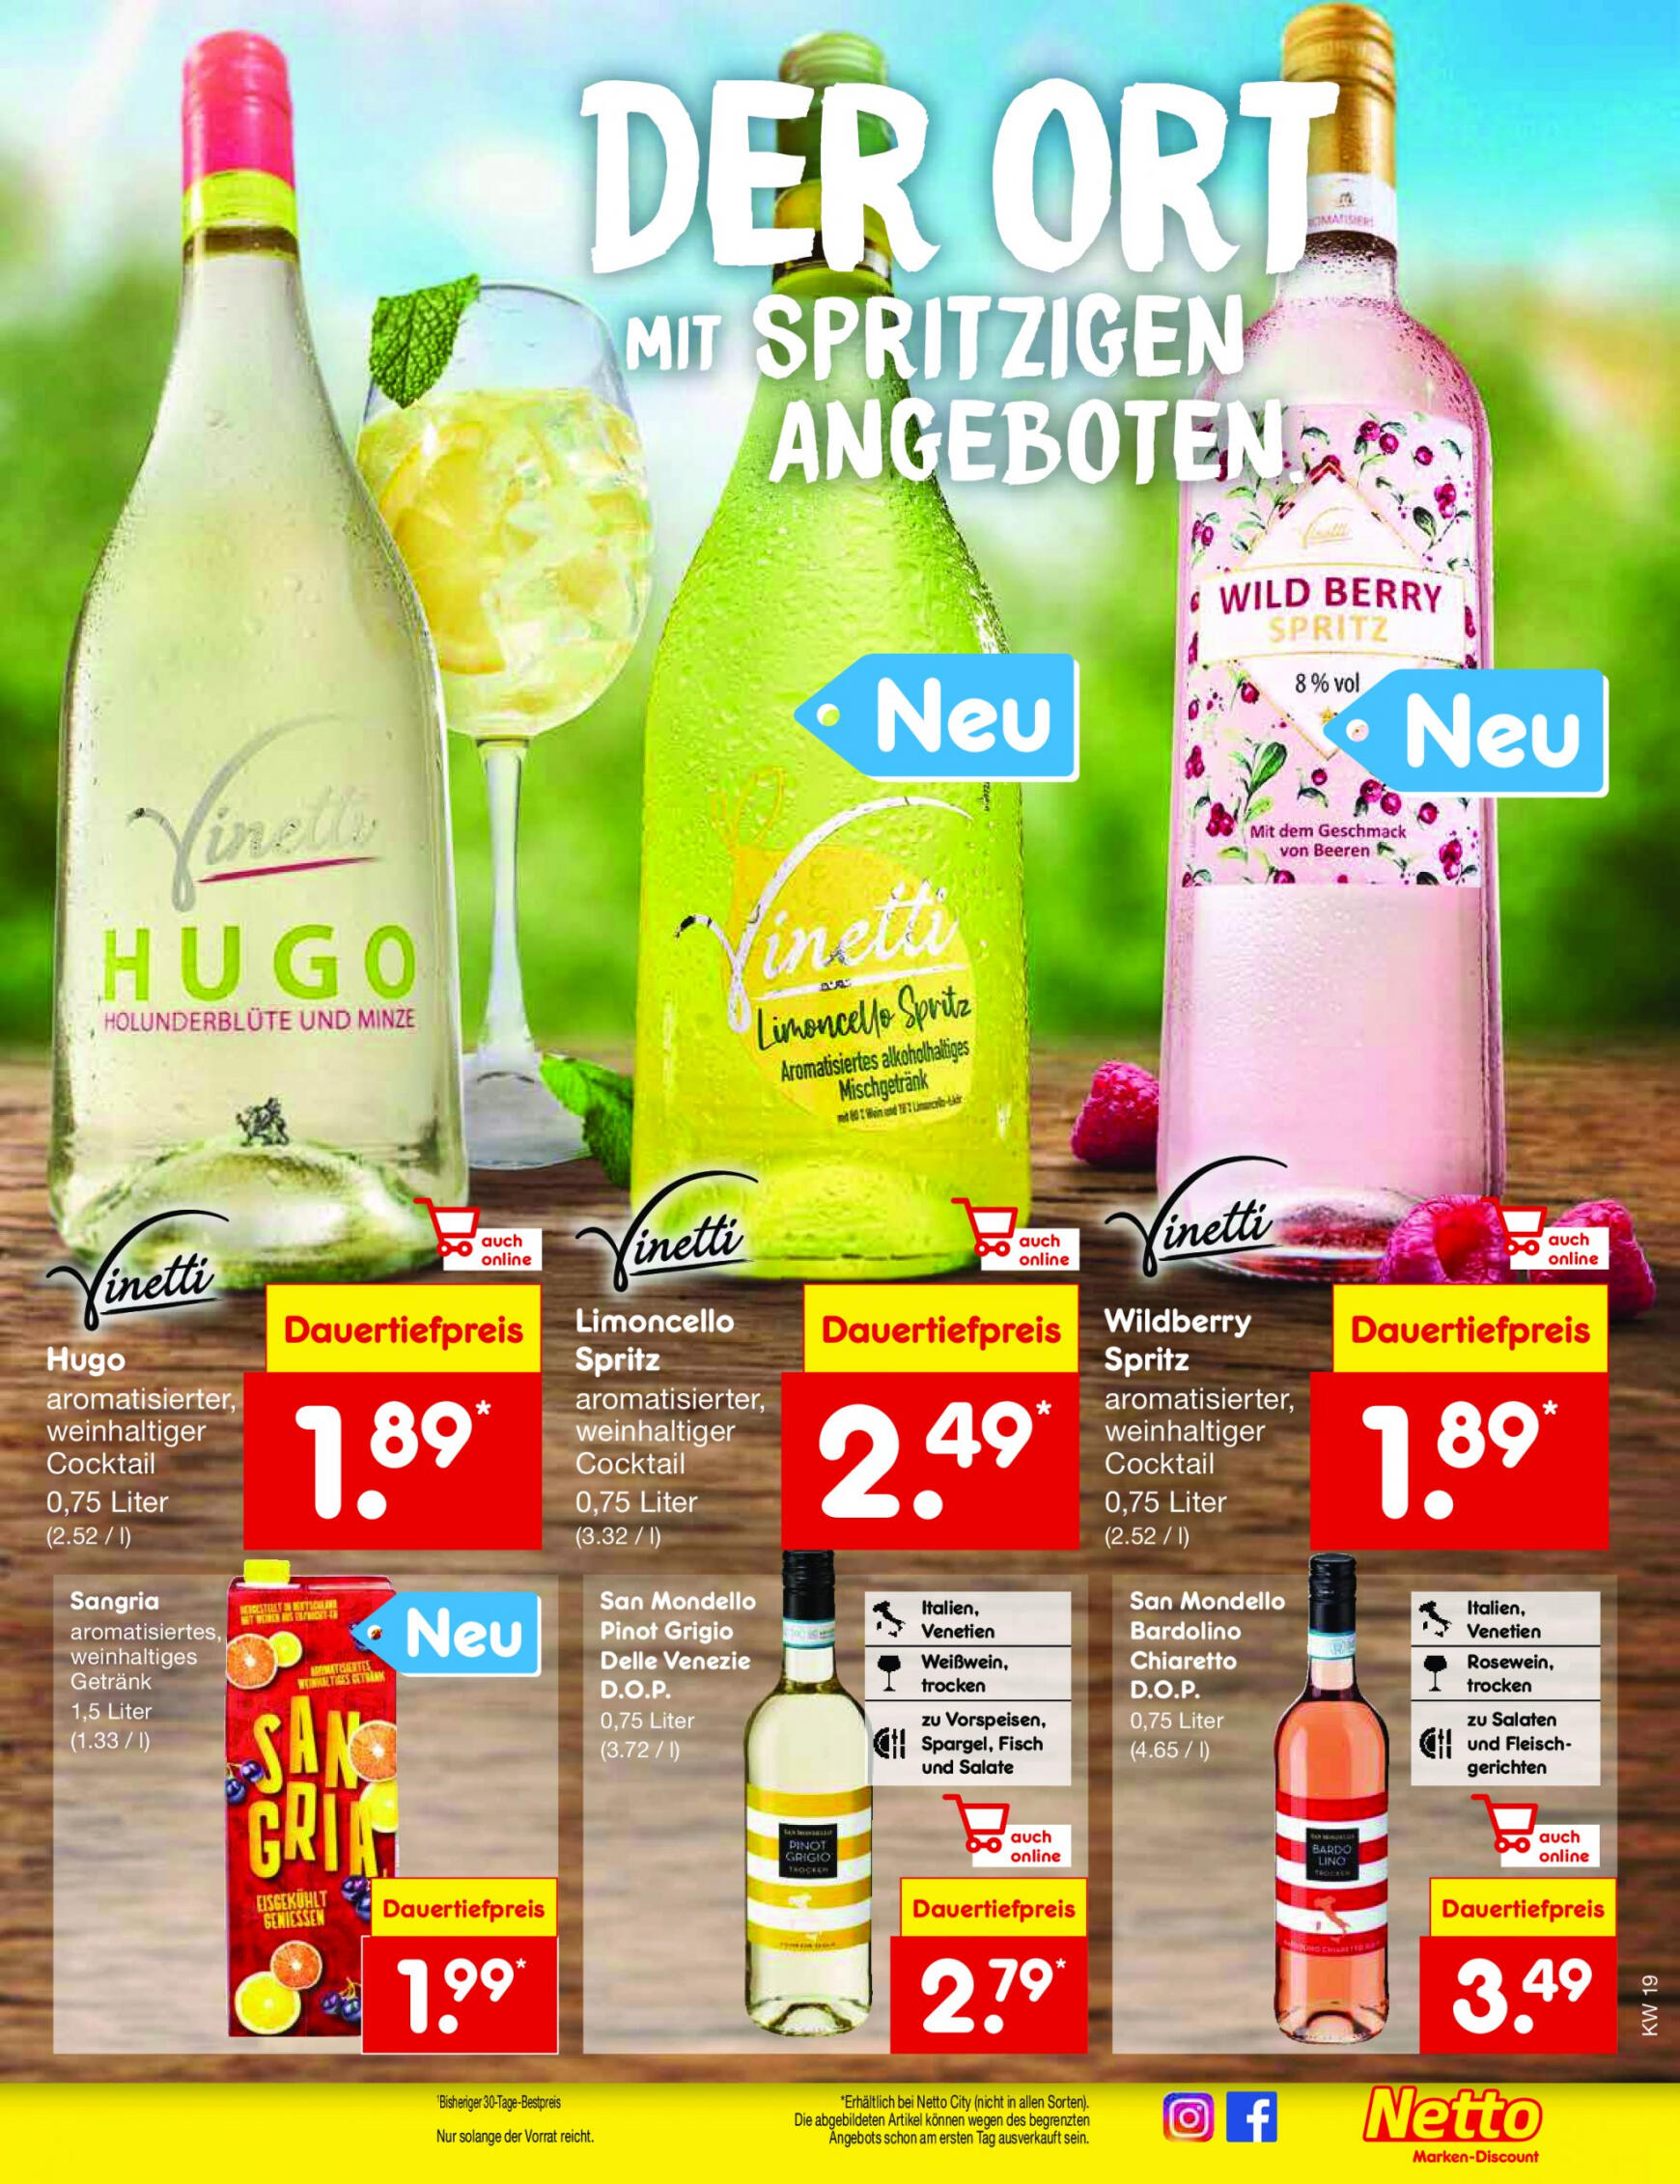 netto - Flyer Netto aktuell 06.05. - 11.05. - page: 23